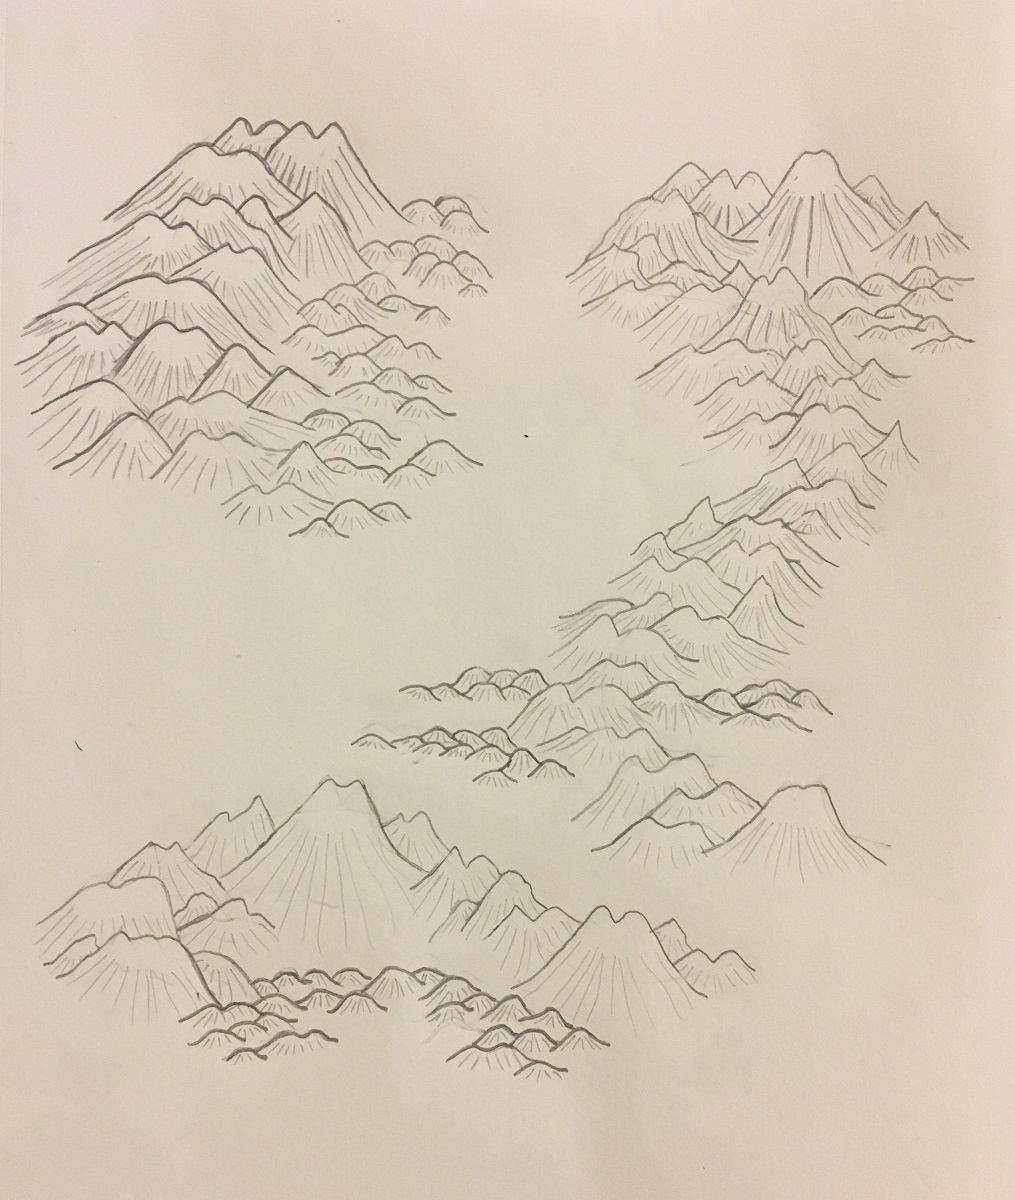 Pencil sketches of mountains ranges and hills